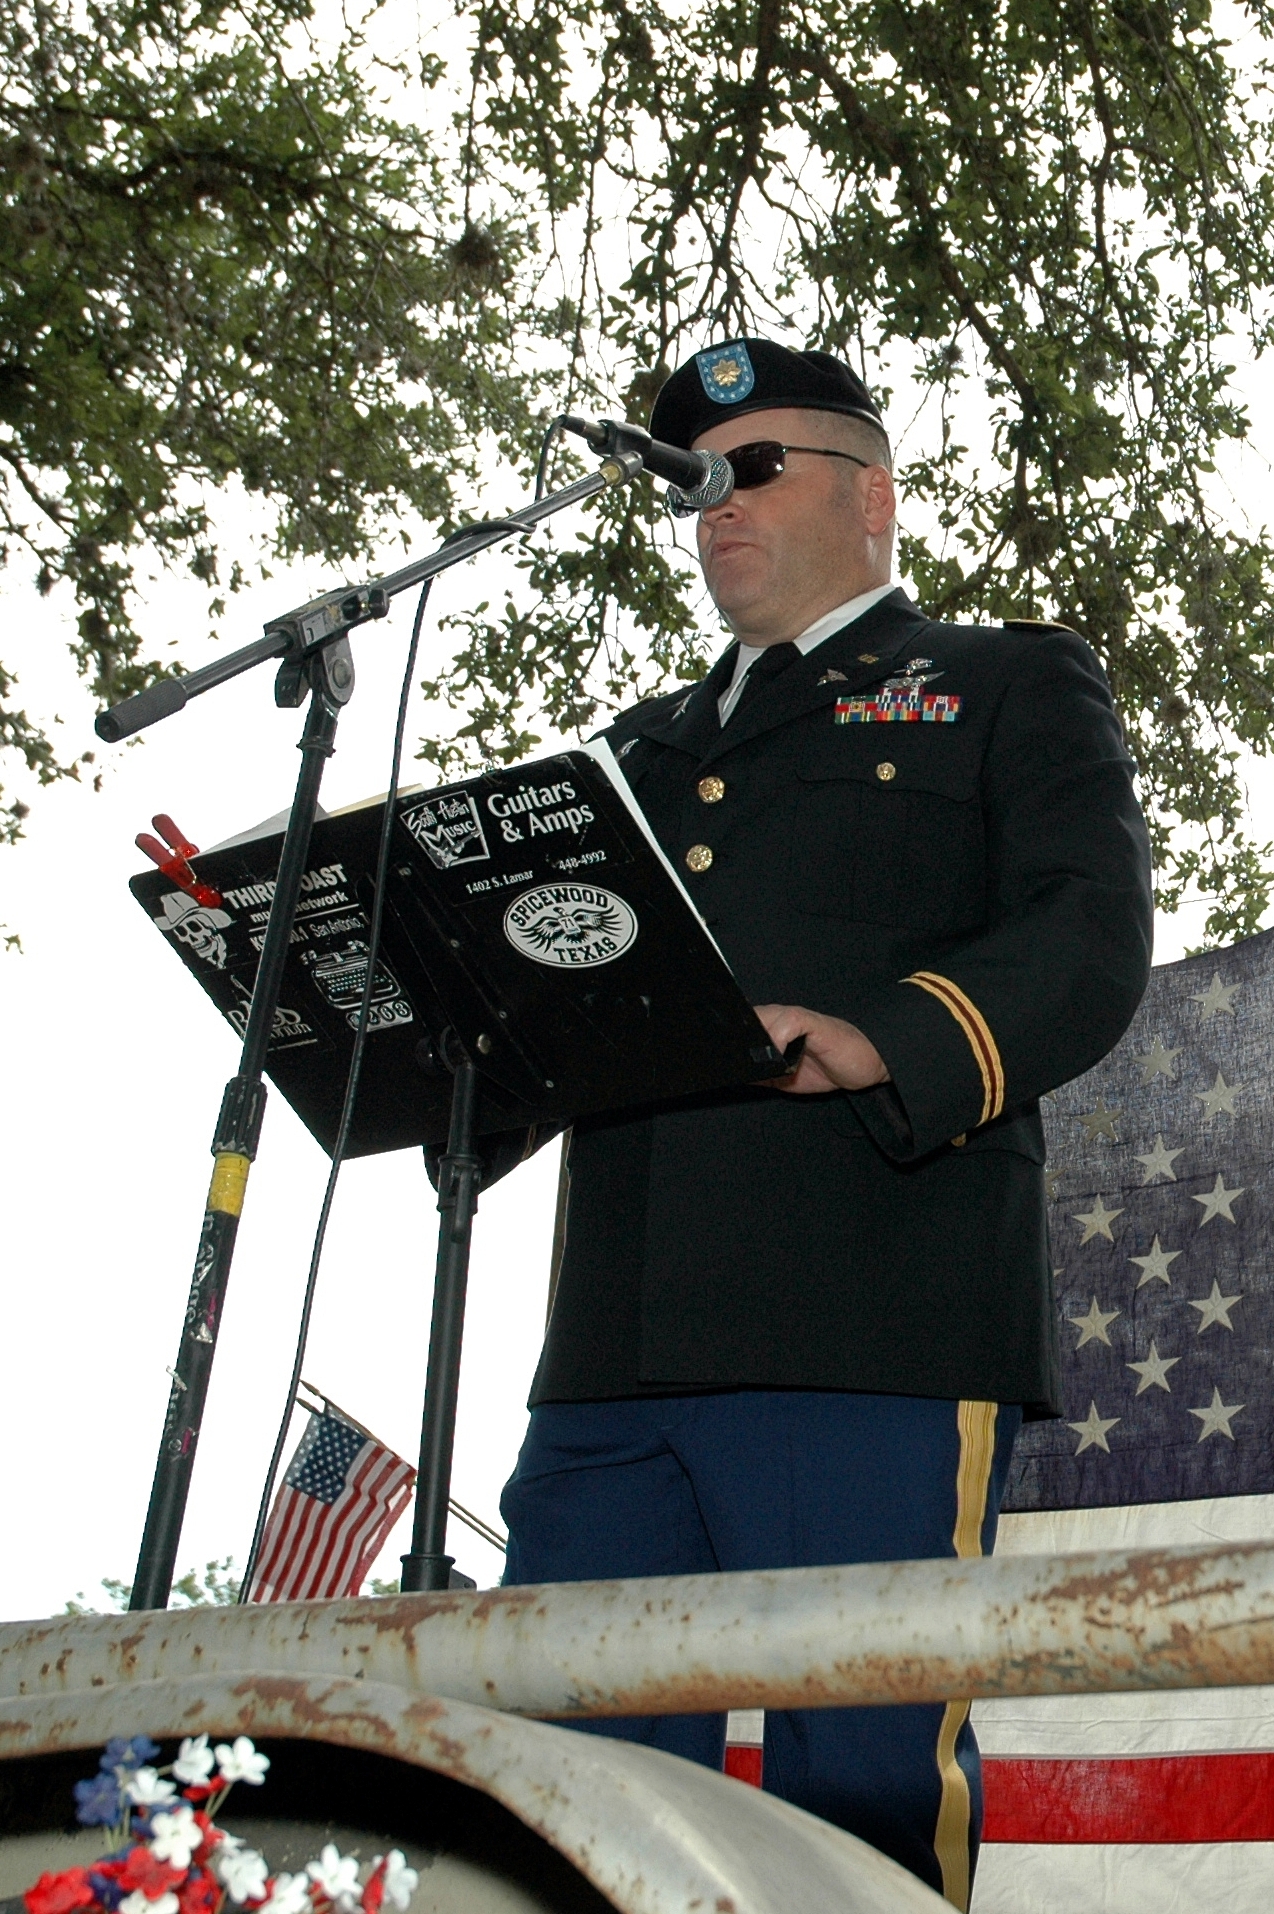 a man in military uniform is holding a microphone